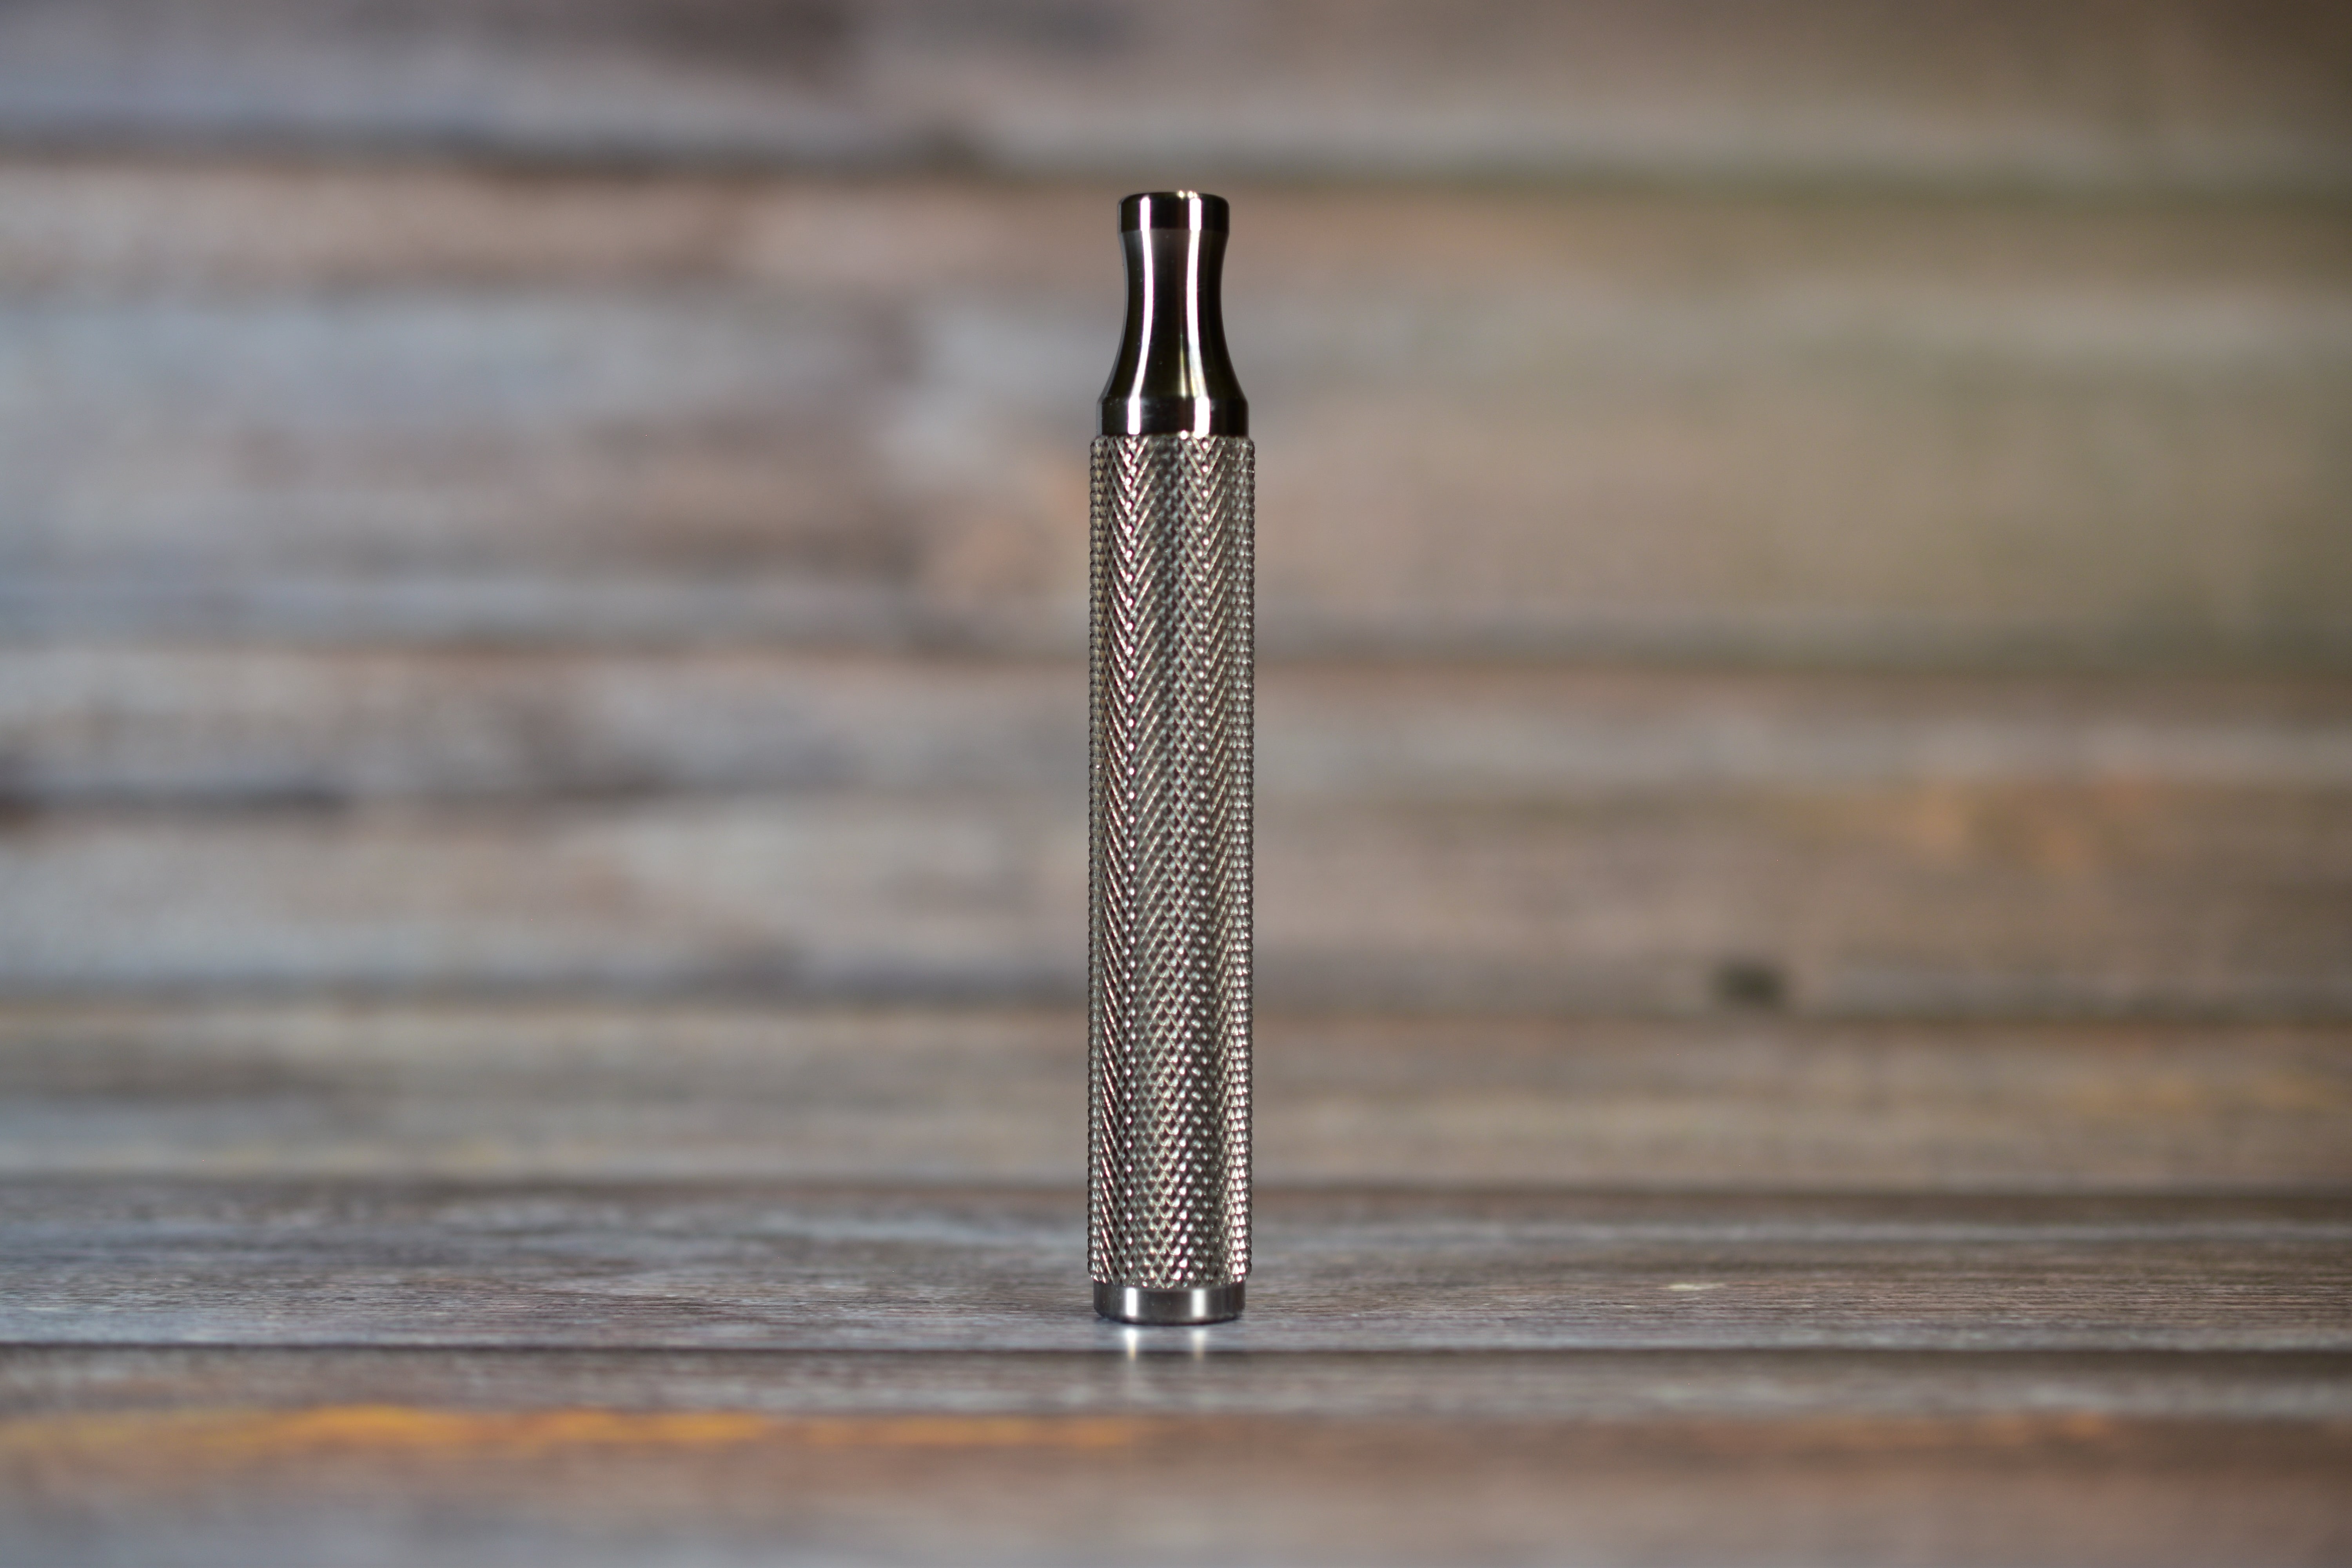 95mm Full-Knurled Ti-5 or Stainless Steel